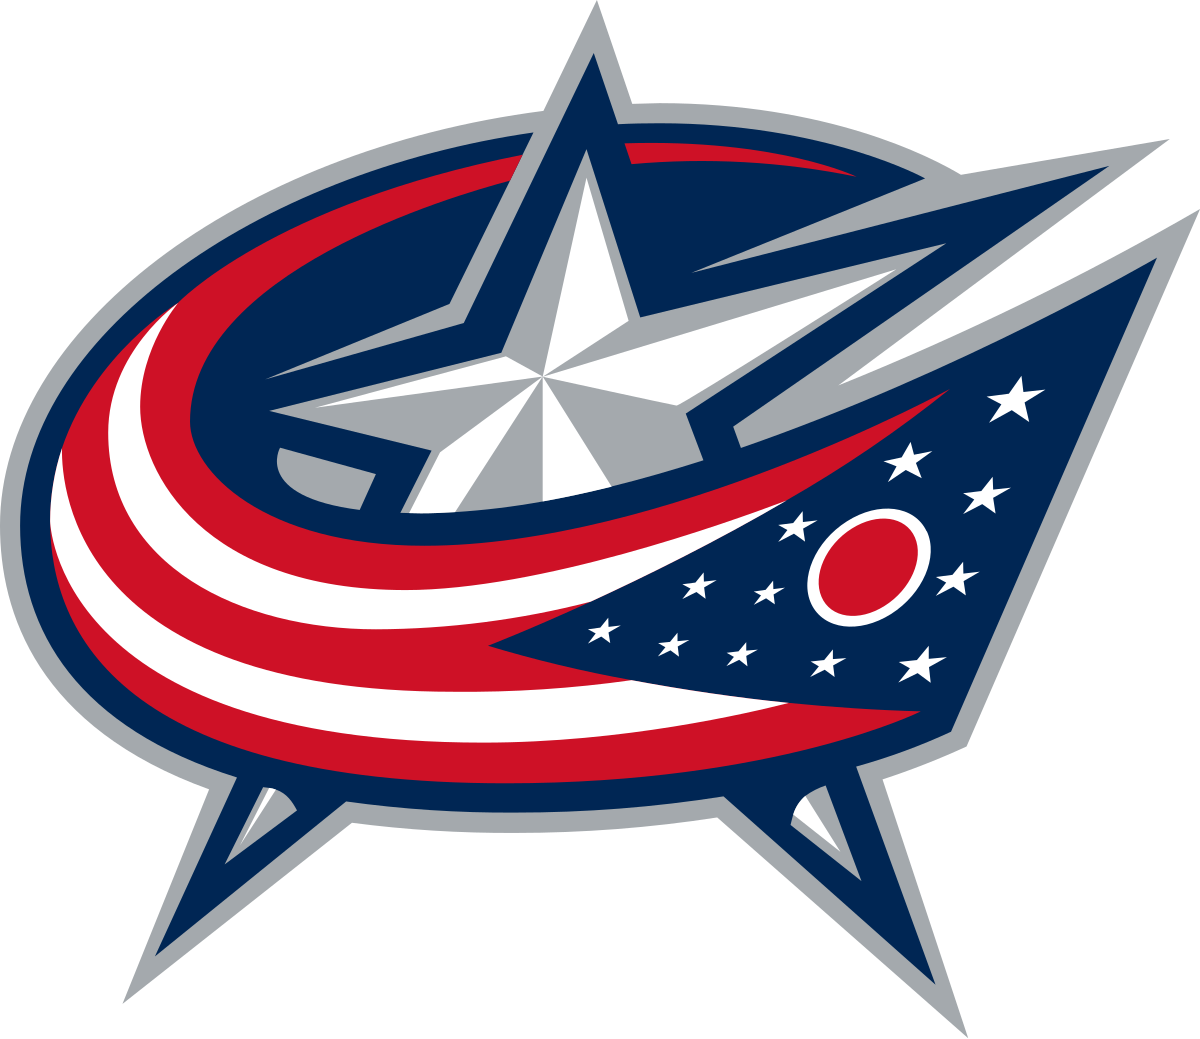 What does cbj stand for